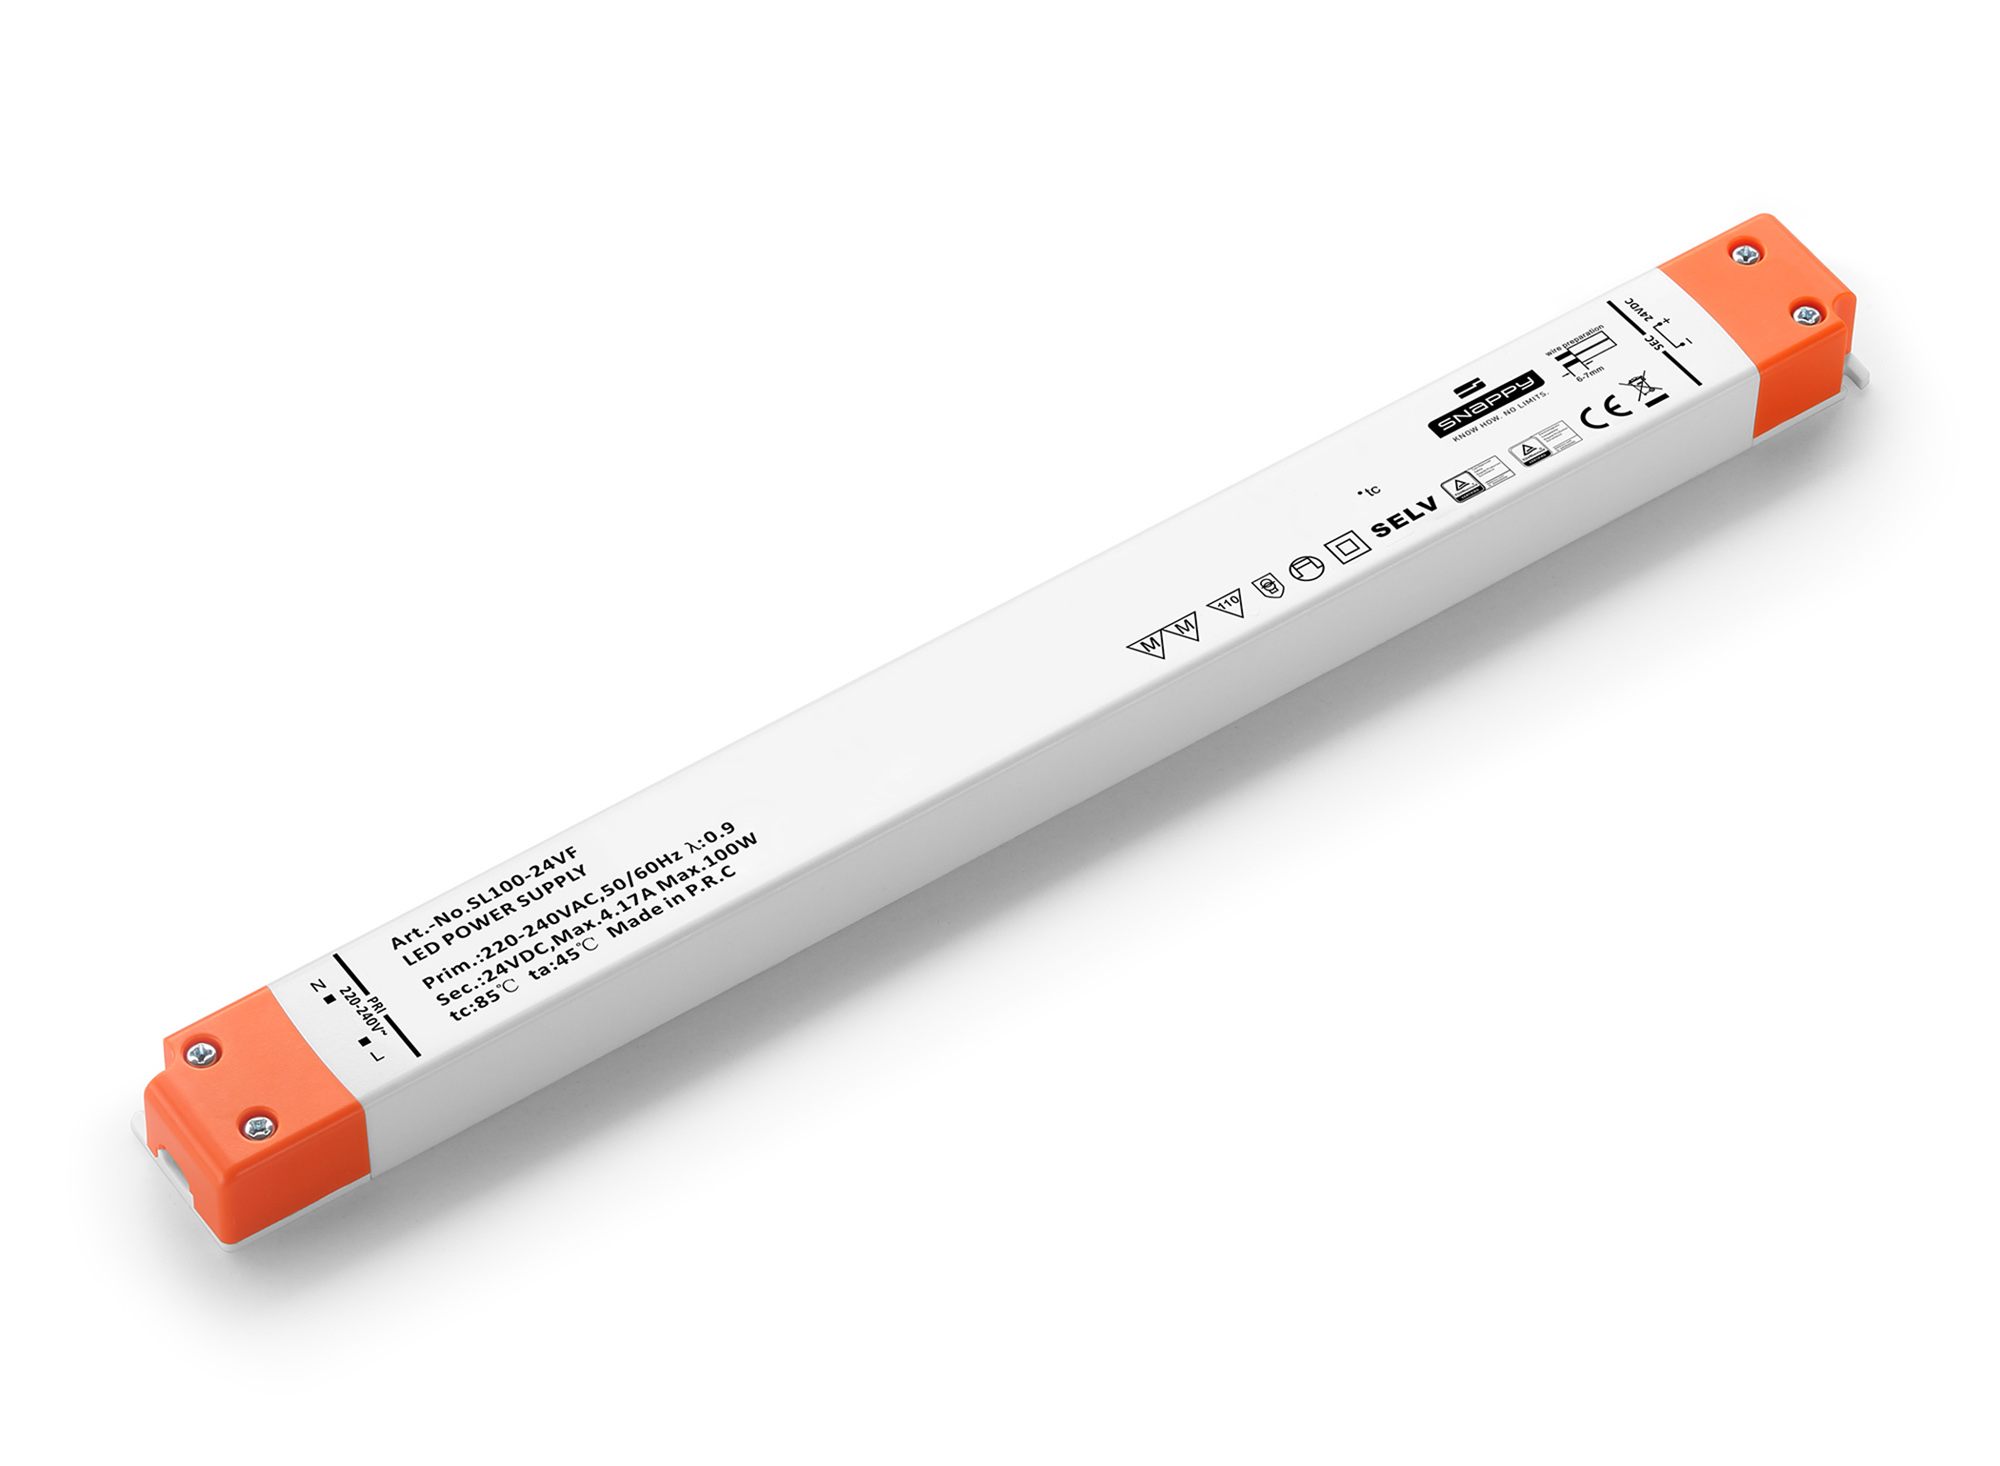 SL100-24VF  100W; Constant Voltage Non Dimmable LED Driver; 24VDC; 4.16A; Input 200-240VAC 50/60Hz; IP20.